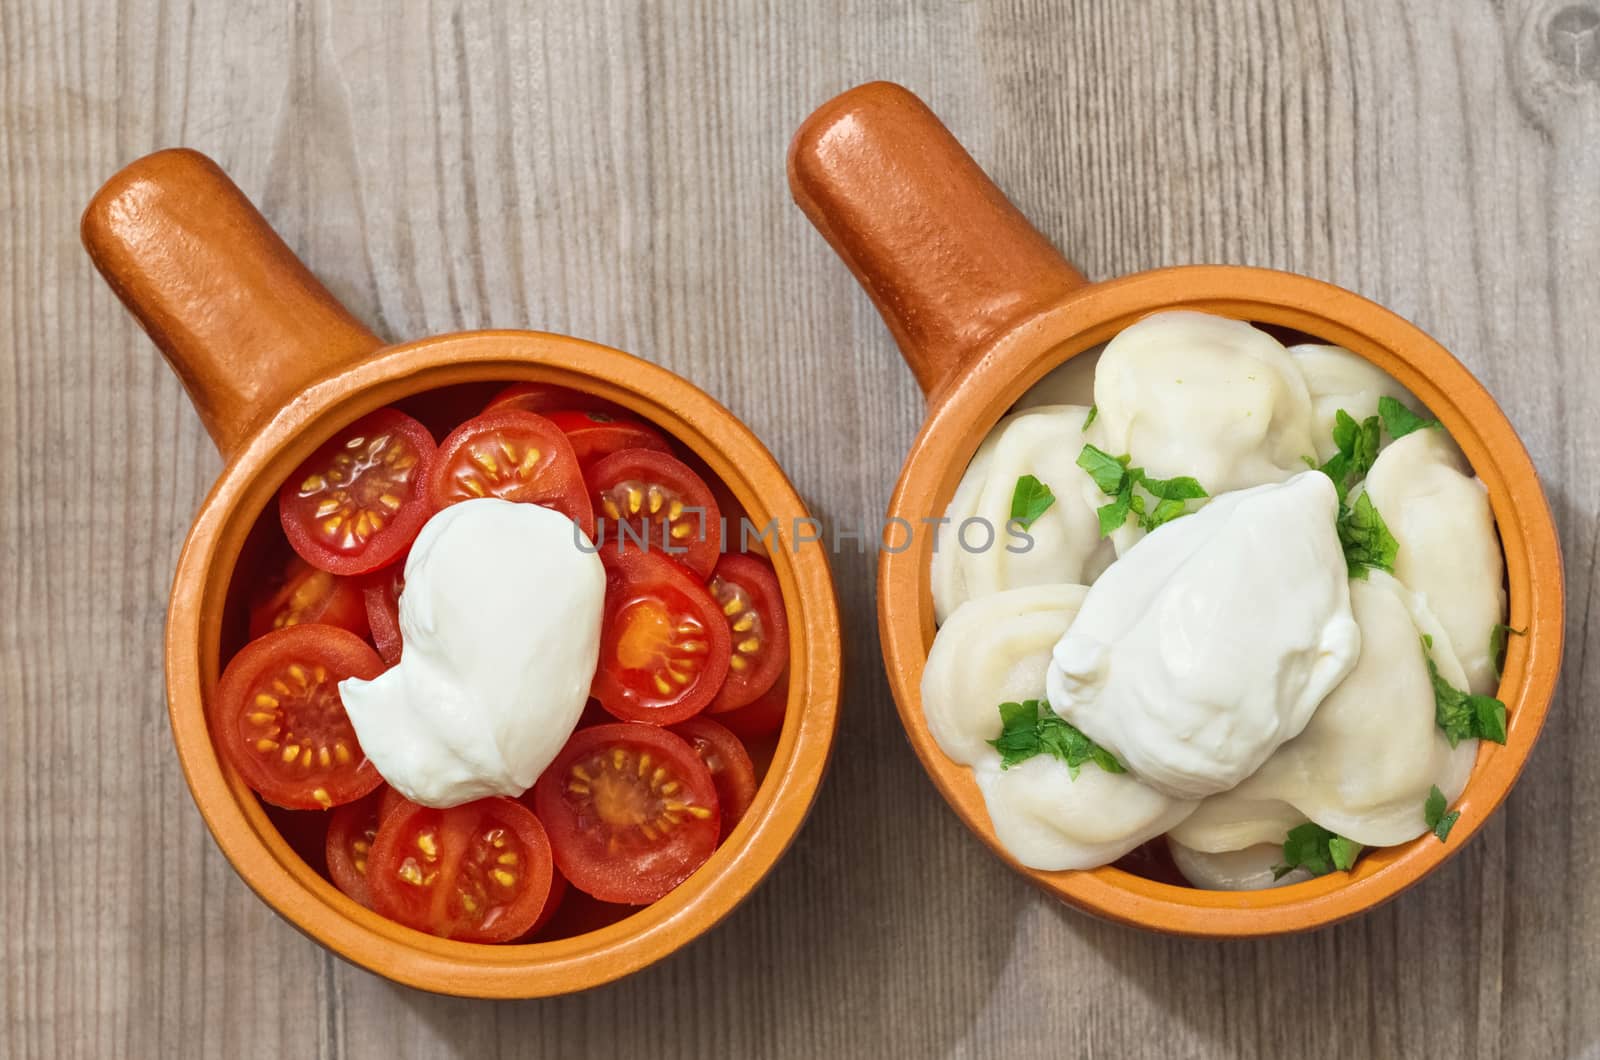 Chopped tomatoes and dumplings with sour cream by Gaina